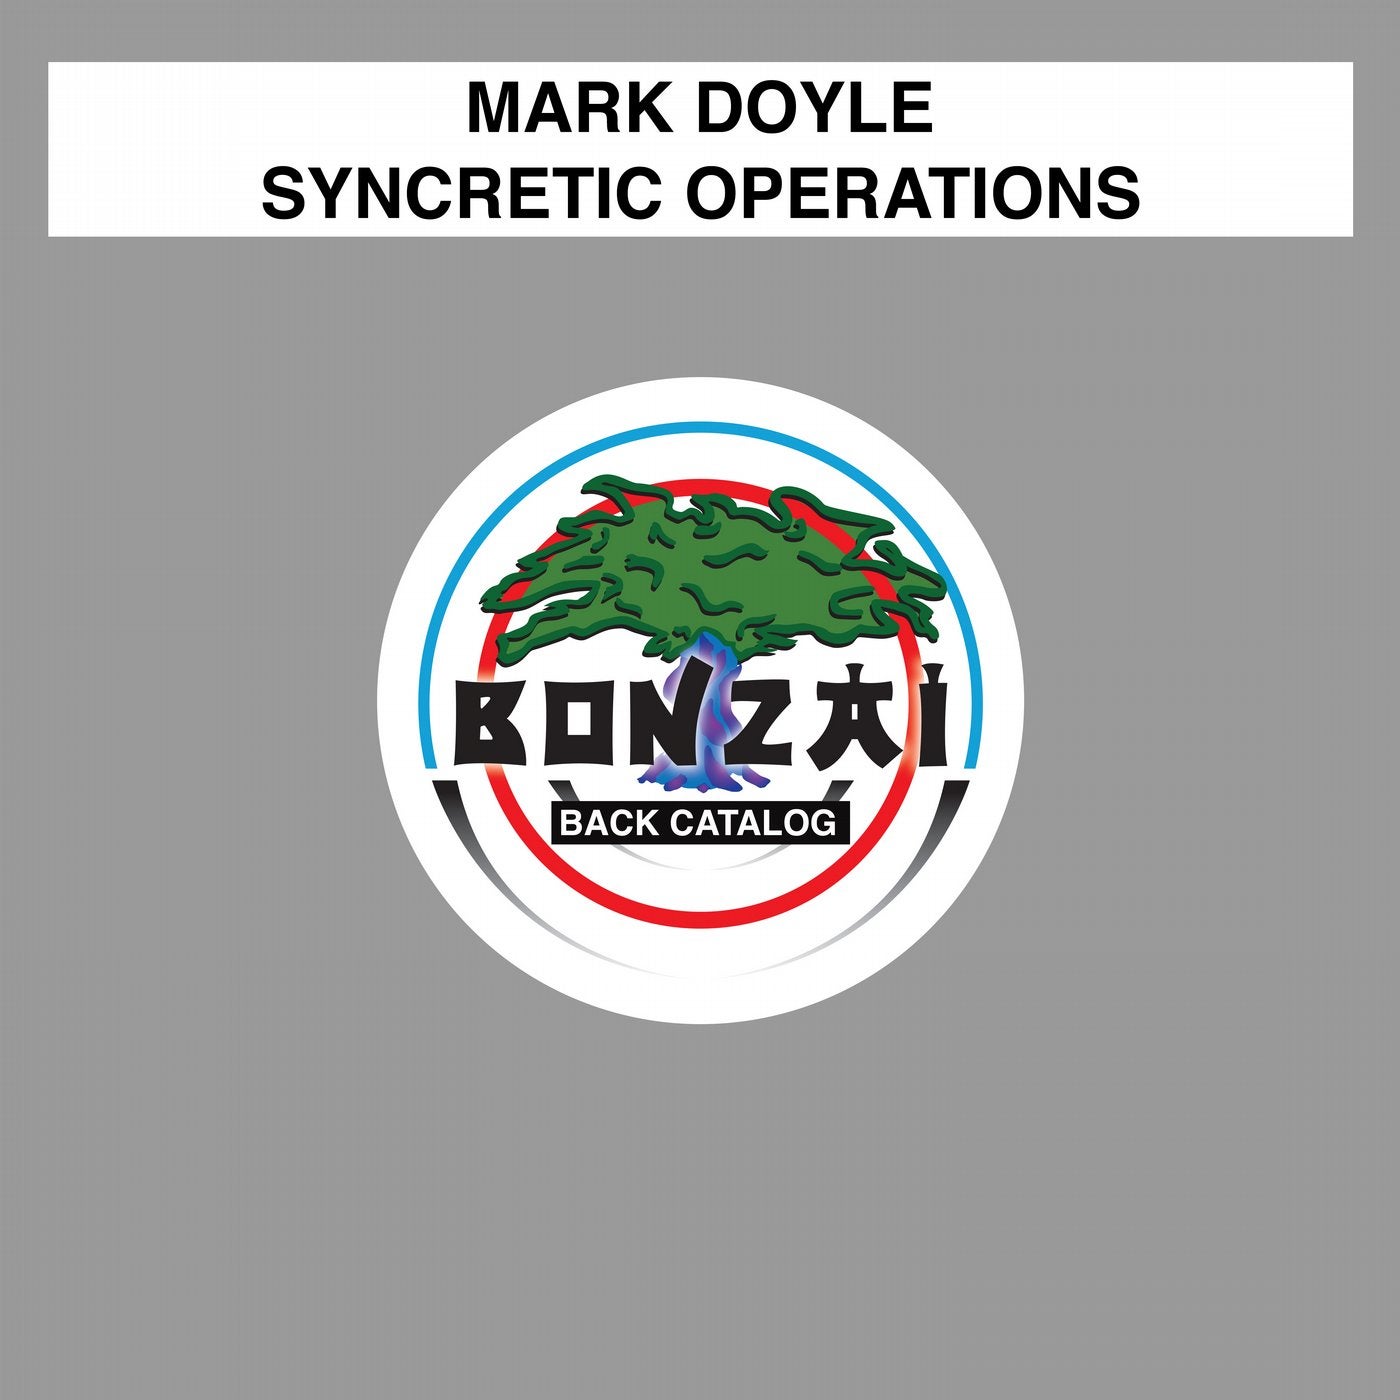 Syncretic Operations